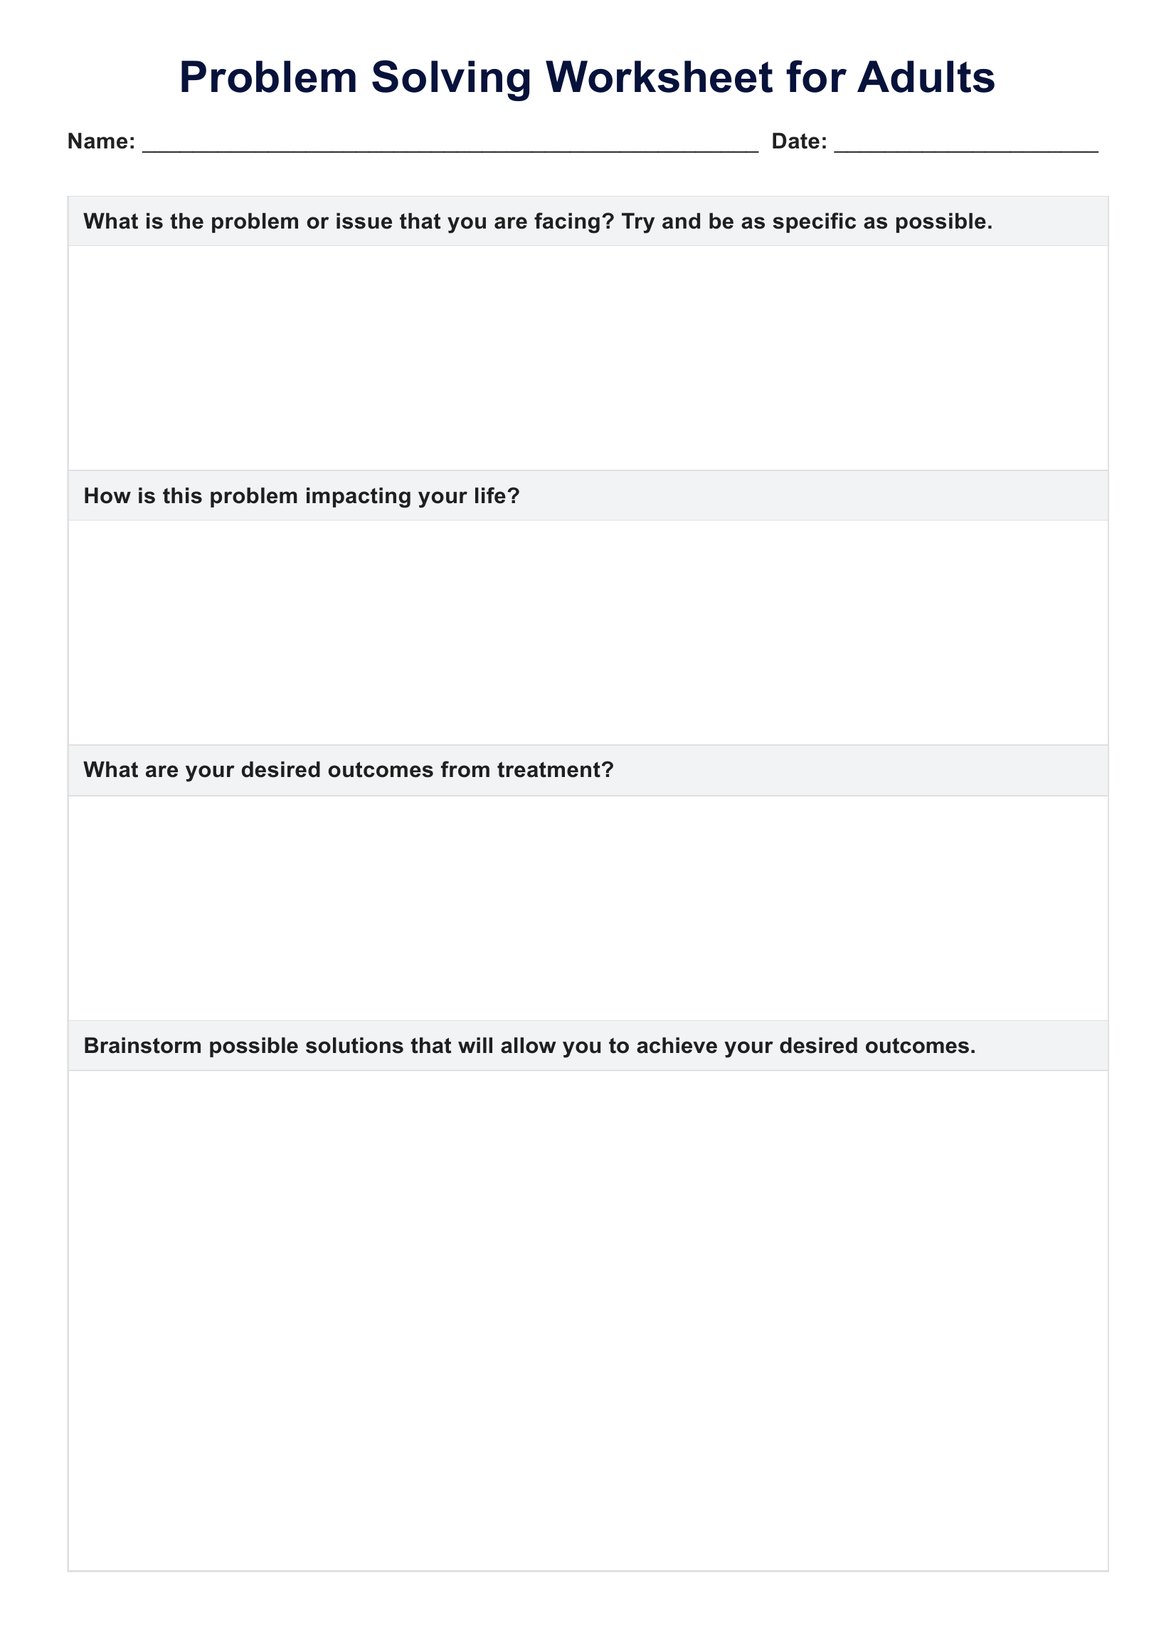 Problem Solving For Adults Worksheets PDF Example